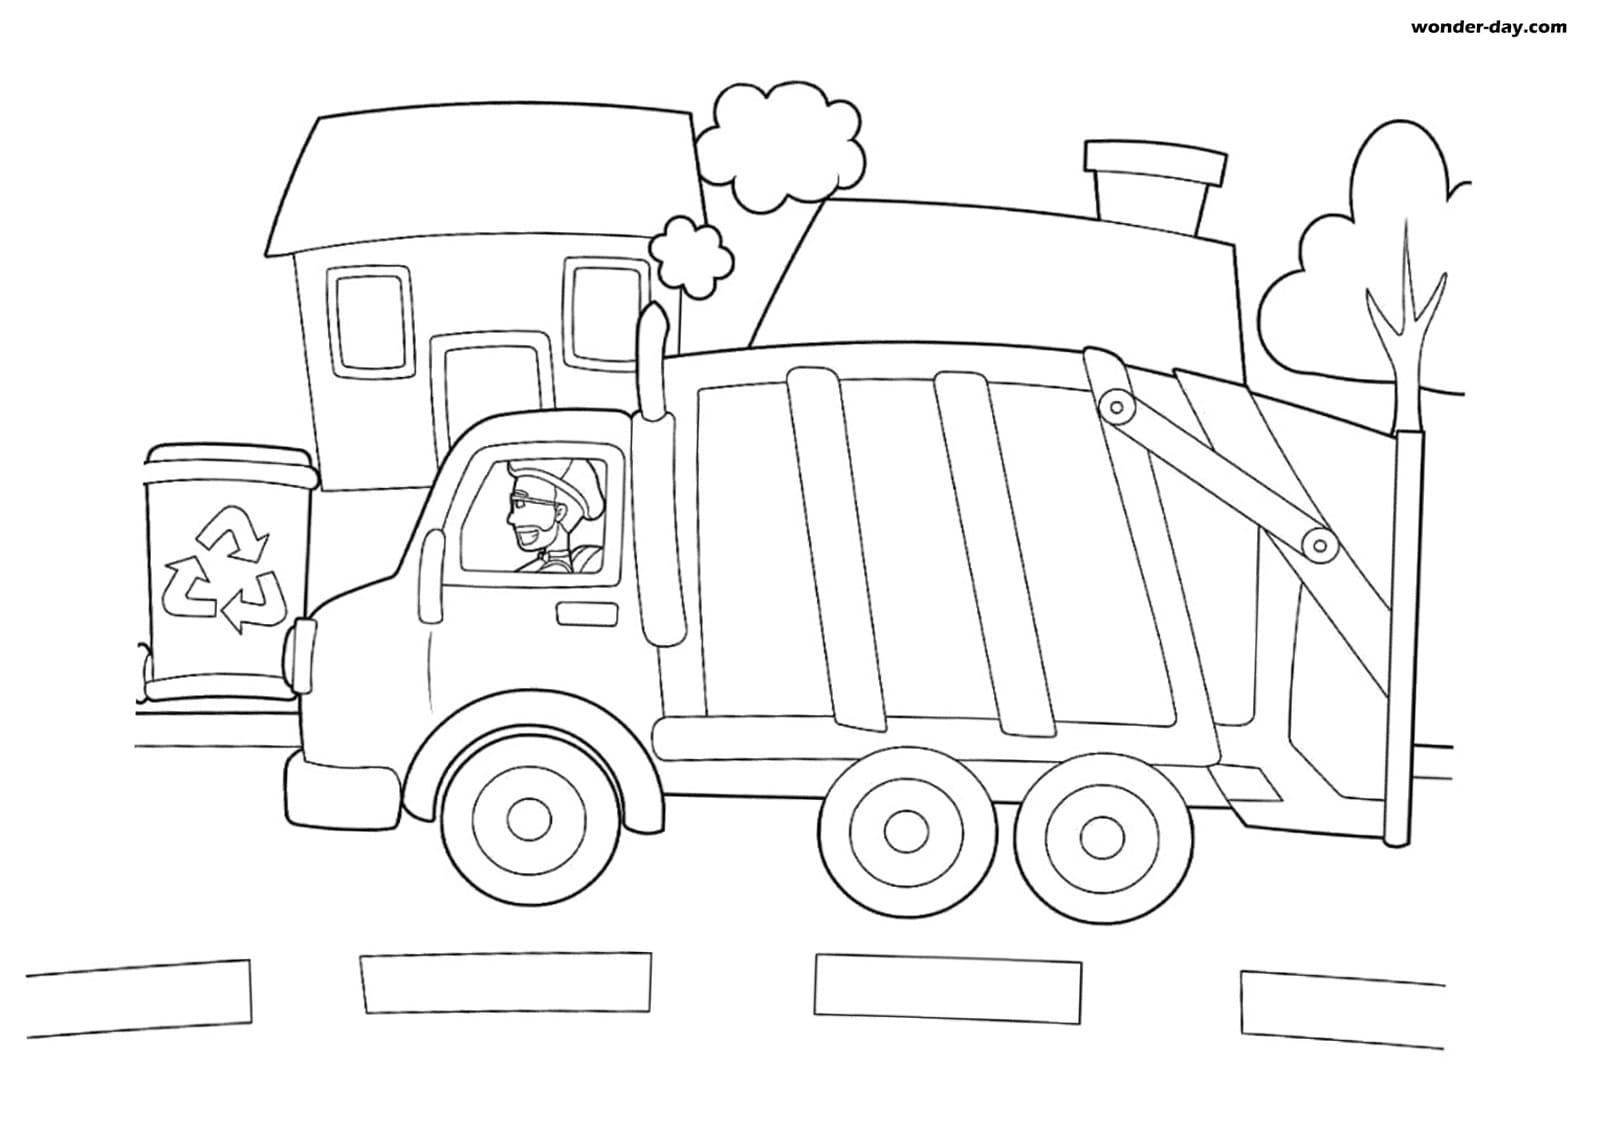 free-printable-blippi-coloring-pages-for-kids-wonder-day-coloring